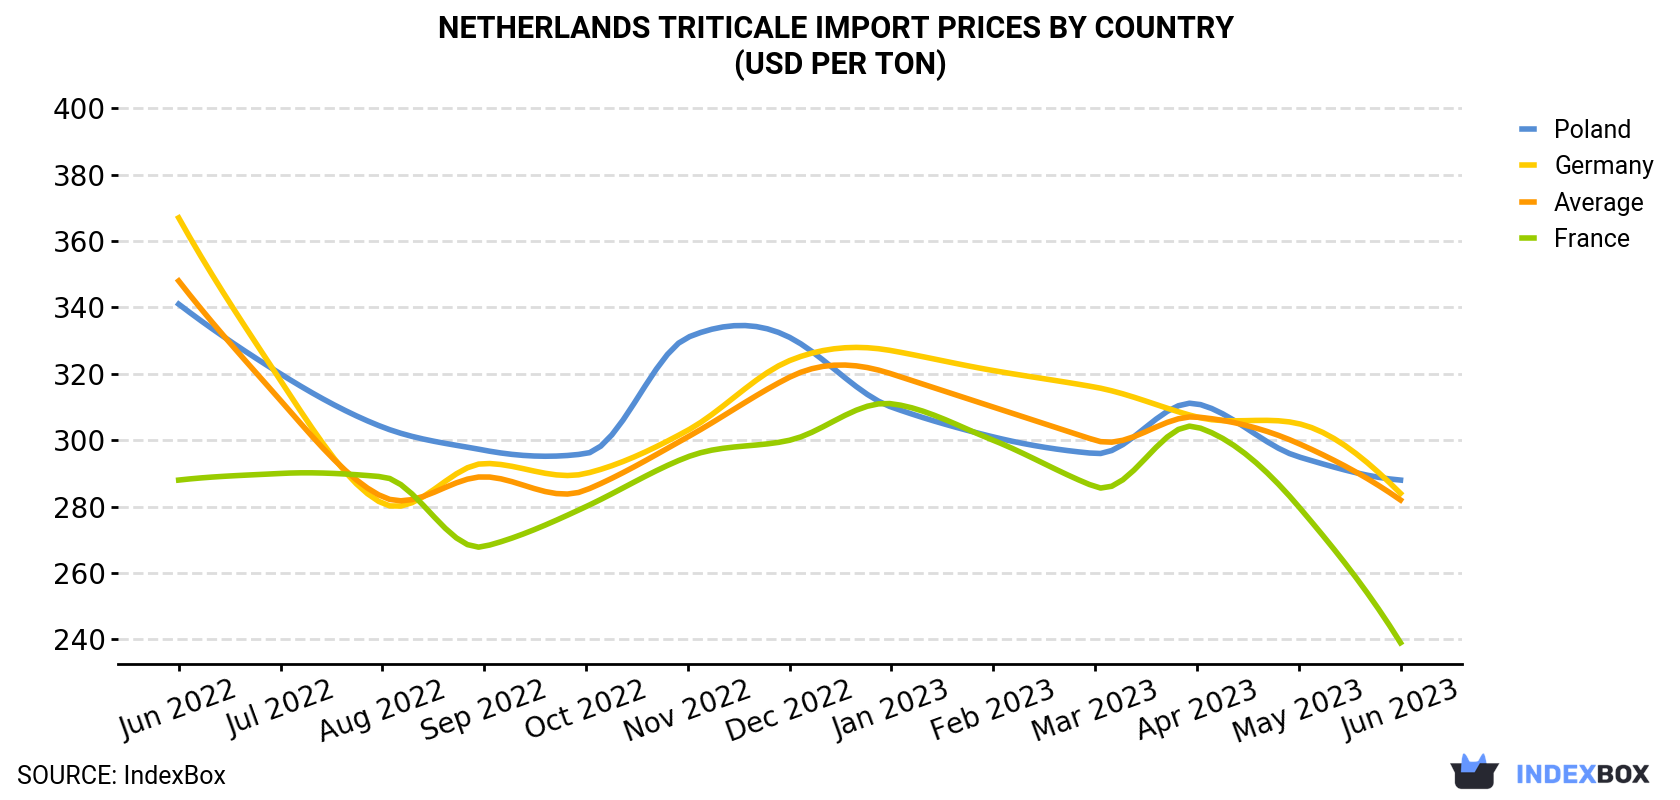 Netherlands Triticale Import Prices By Country (USD Per Ton)